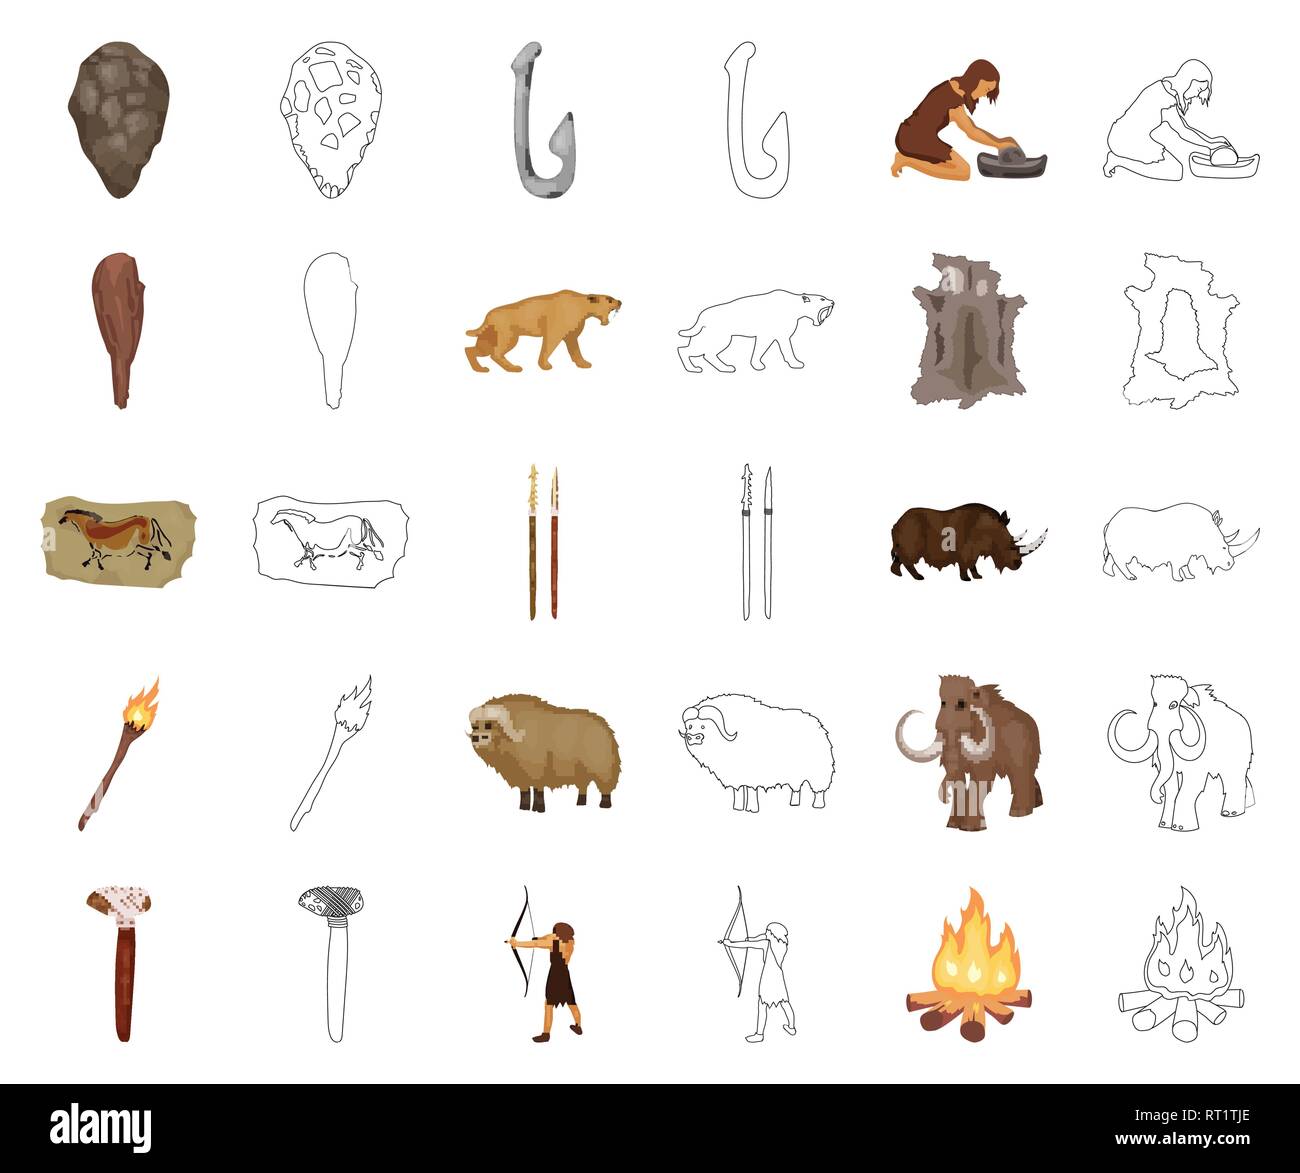 age,ancient,animal,antiquity,arrow,axe,beginning,bone,bow,campfire,cartoon,outline,caveman,cavewoman,collection,culture,design,development,epoch,fauna,fish,grindstone,hide,hook,humanity,icon,illustration,isolated,life,logo,man,muskox,painting,people,period,rhinoceros,saber-toothed,set,sign,spears,stone,survival,symbol,tiger,tool,torch,truncheon,vector,venus,web,woolly mammoth Vector Vectors , Stock Vector